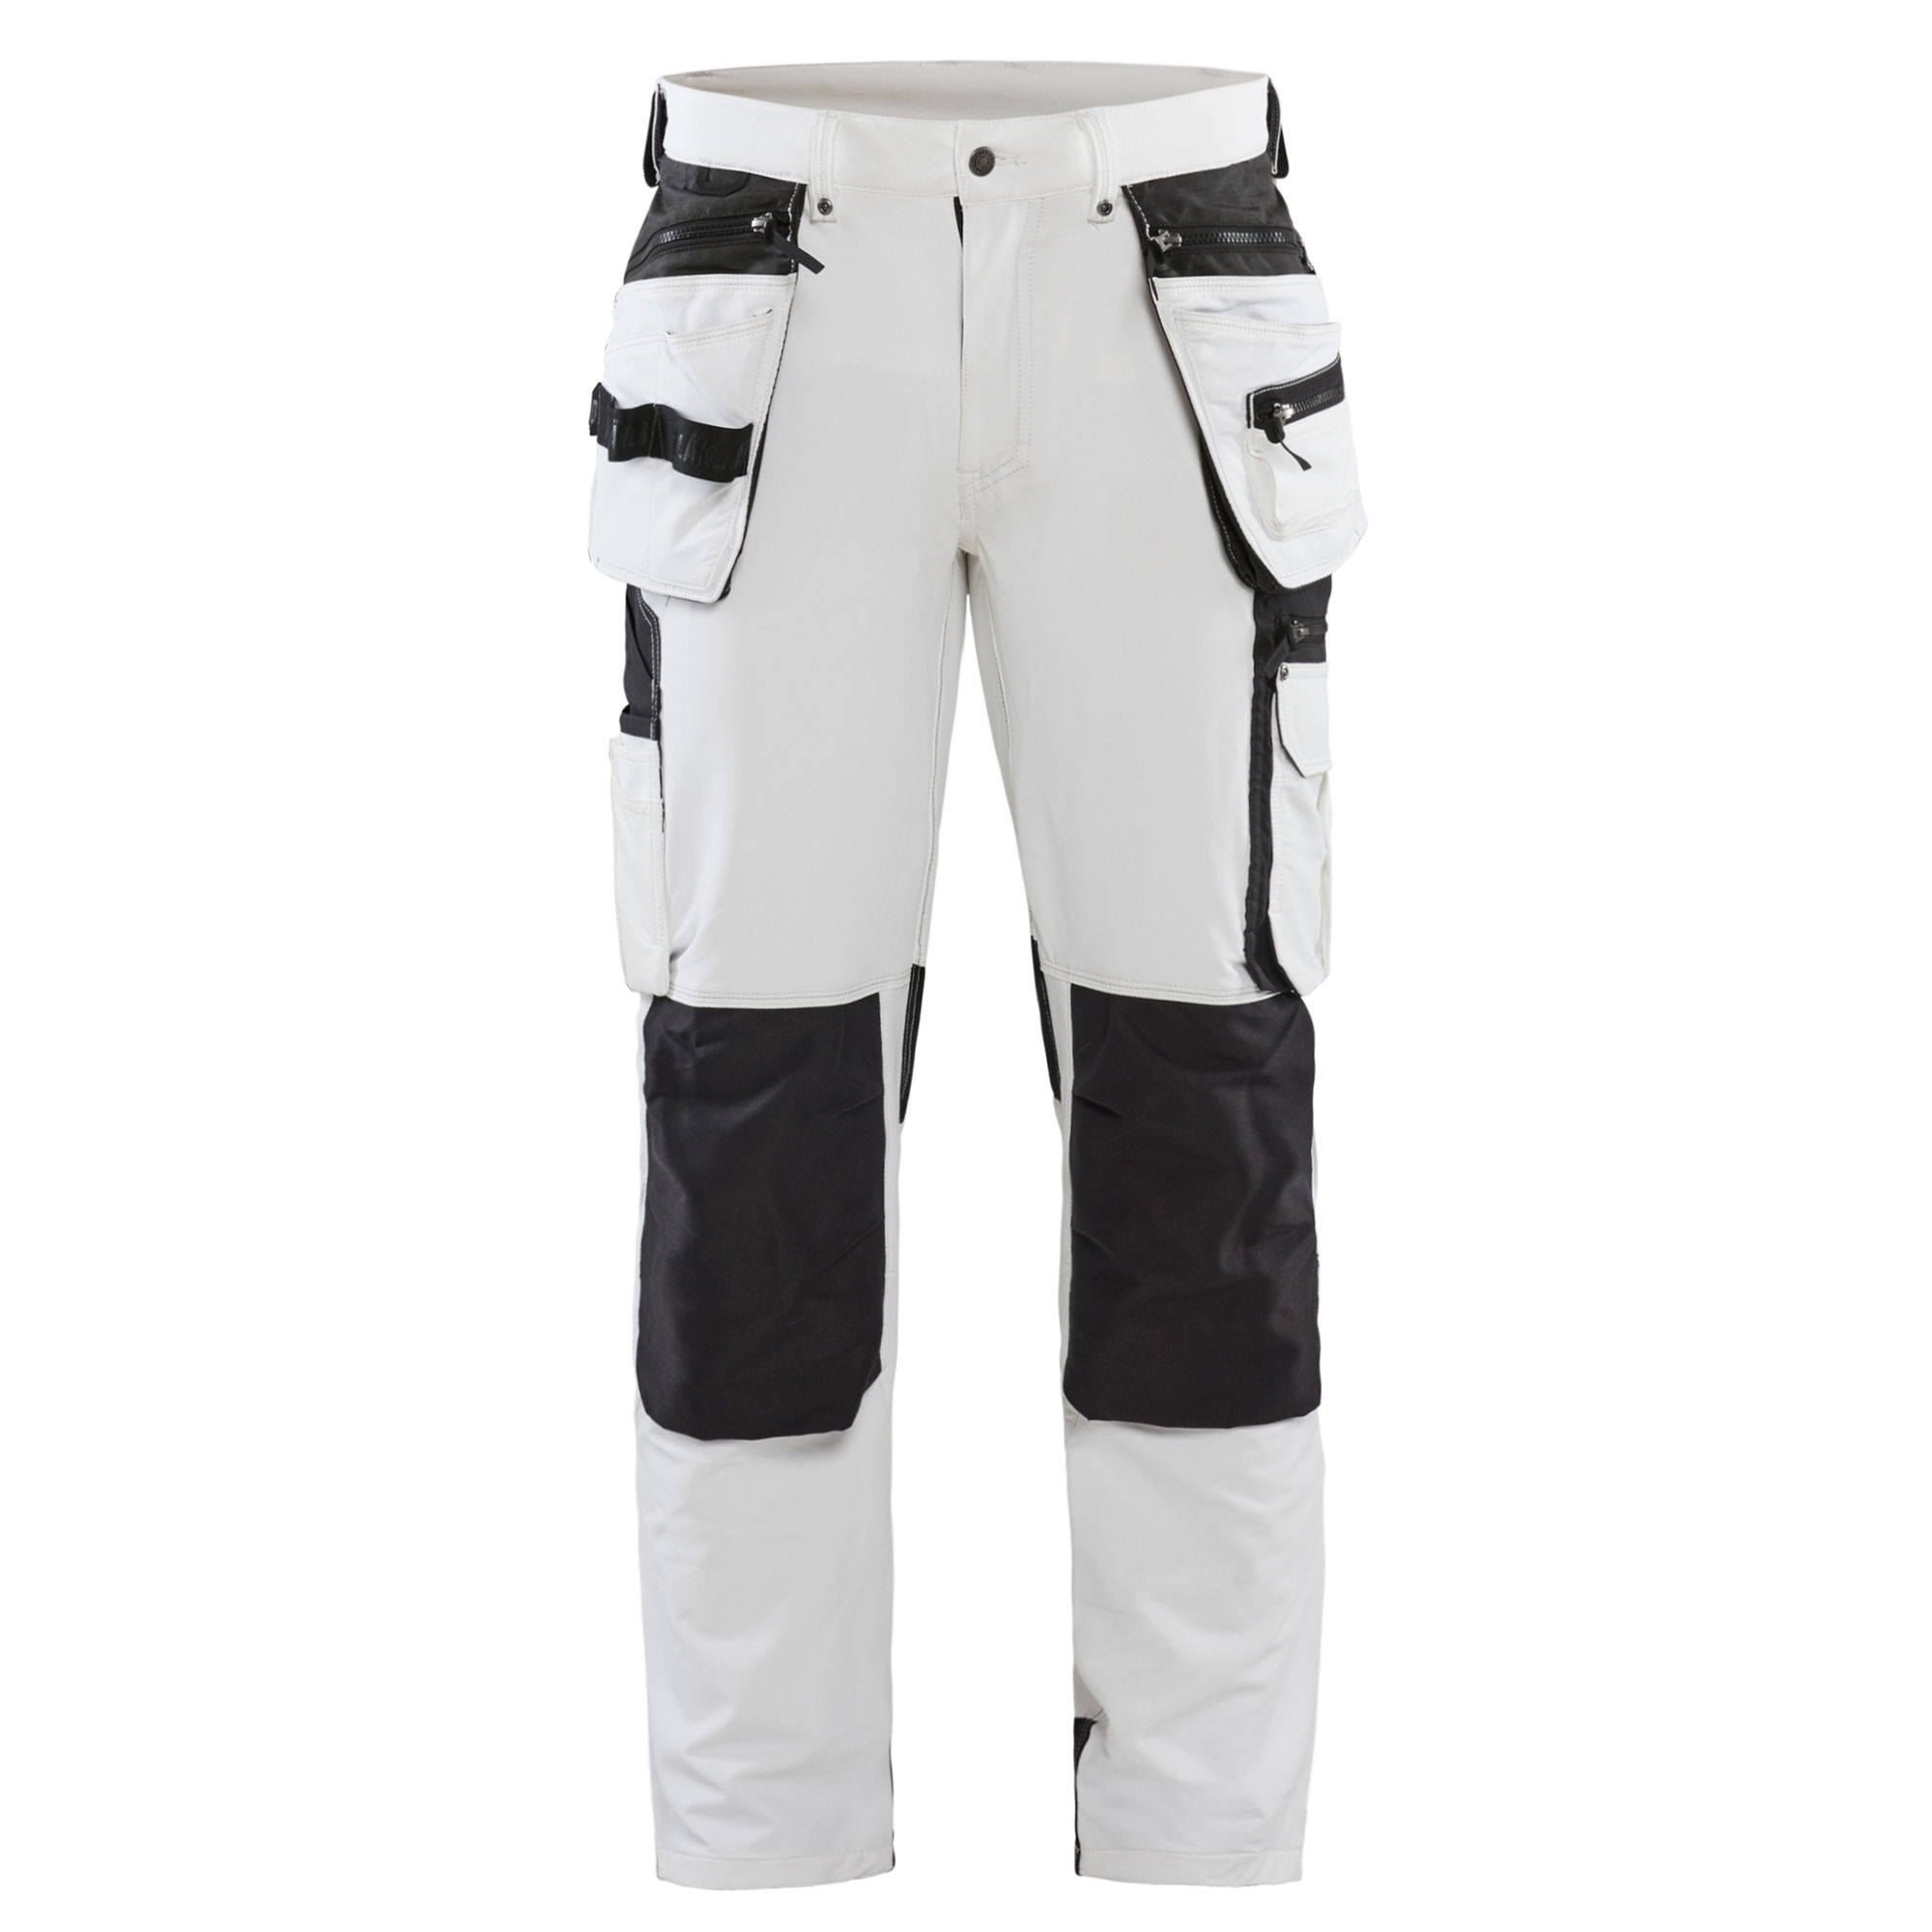 Blaklader 4-way Stretch Painter's Trousers (with holster) - White / Dark Grey